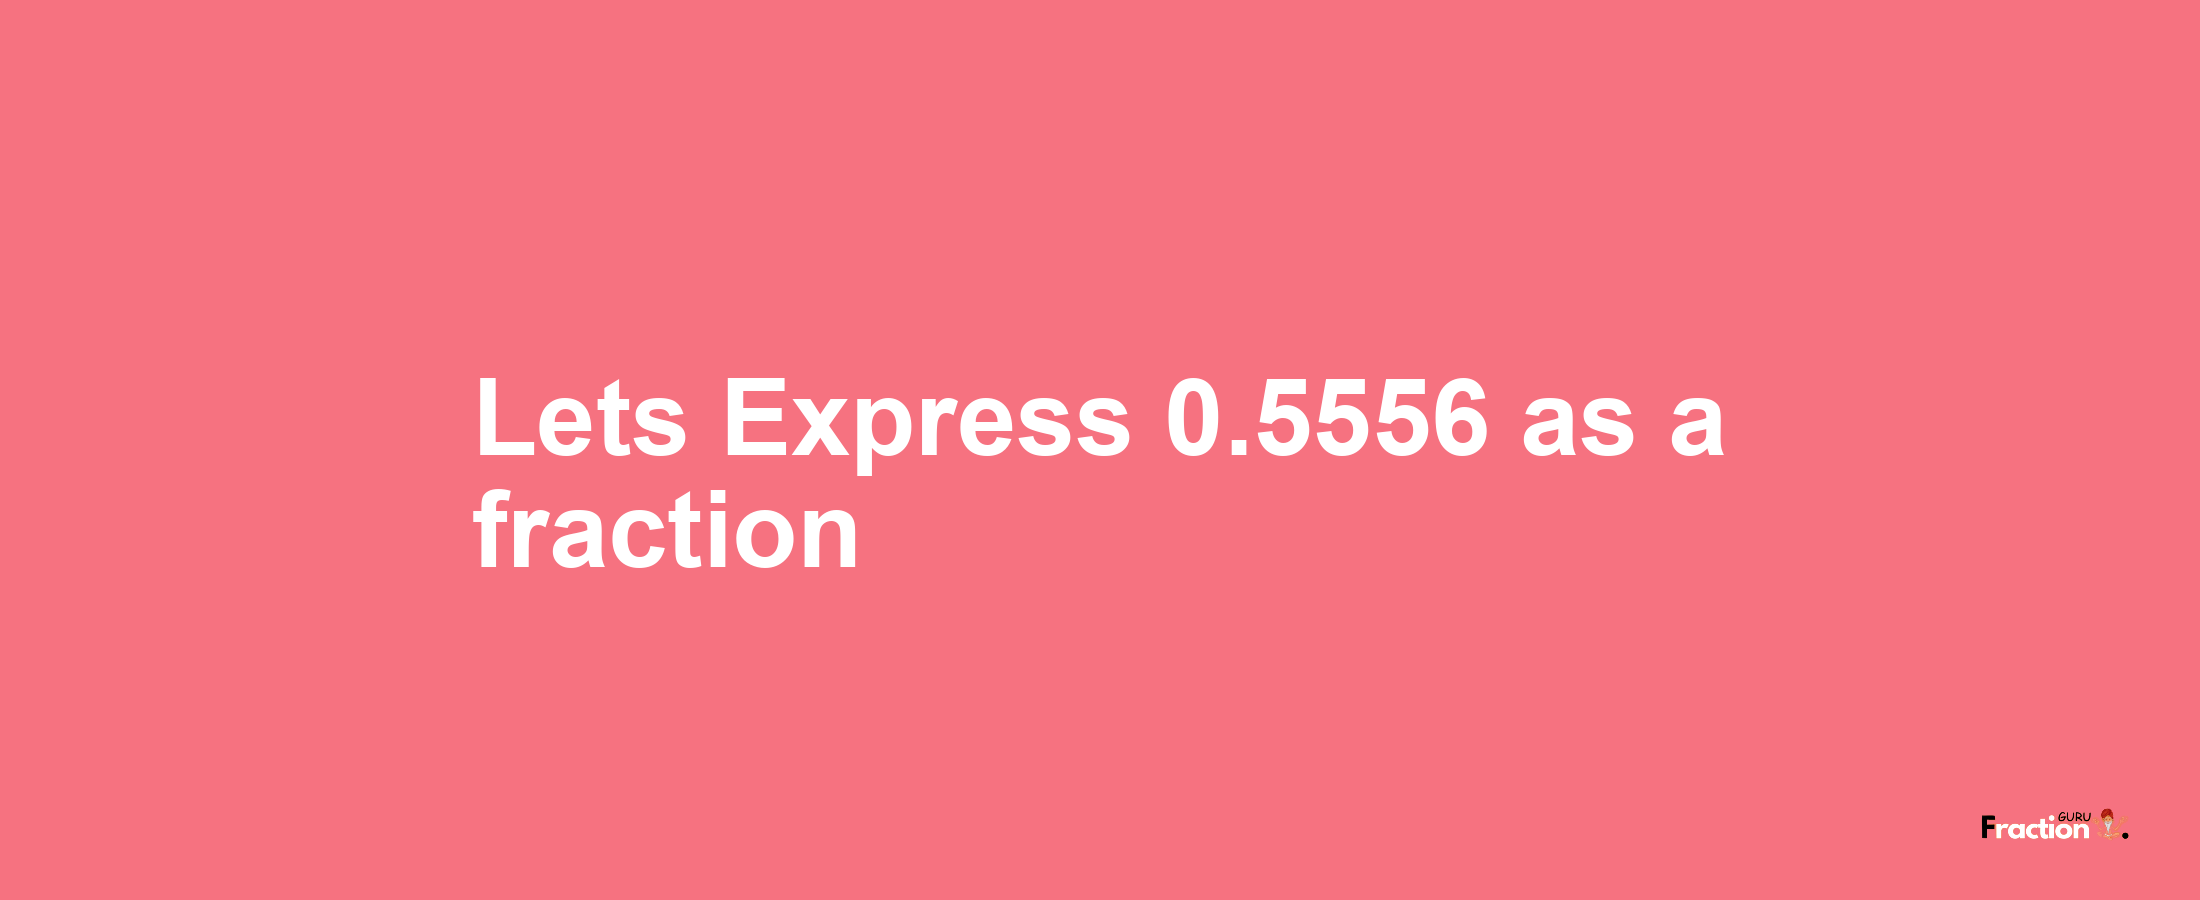 Lets Express 0.5556 as afraction